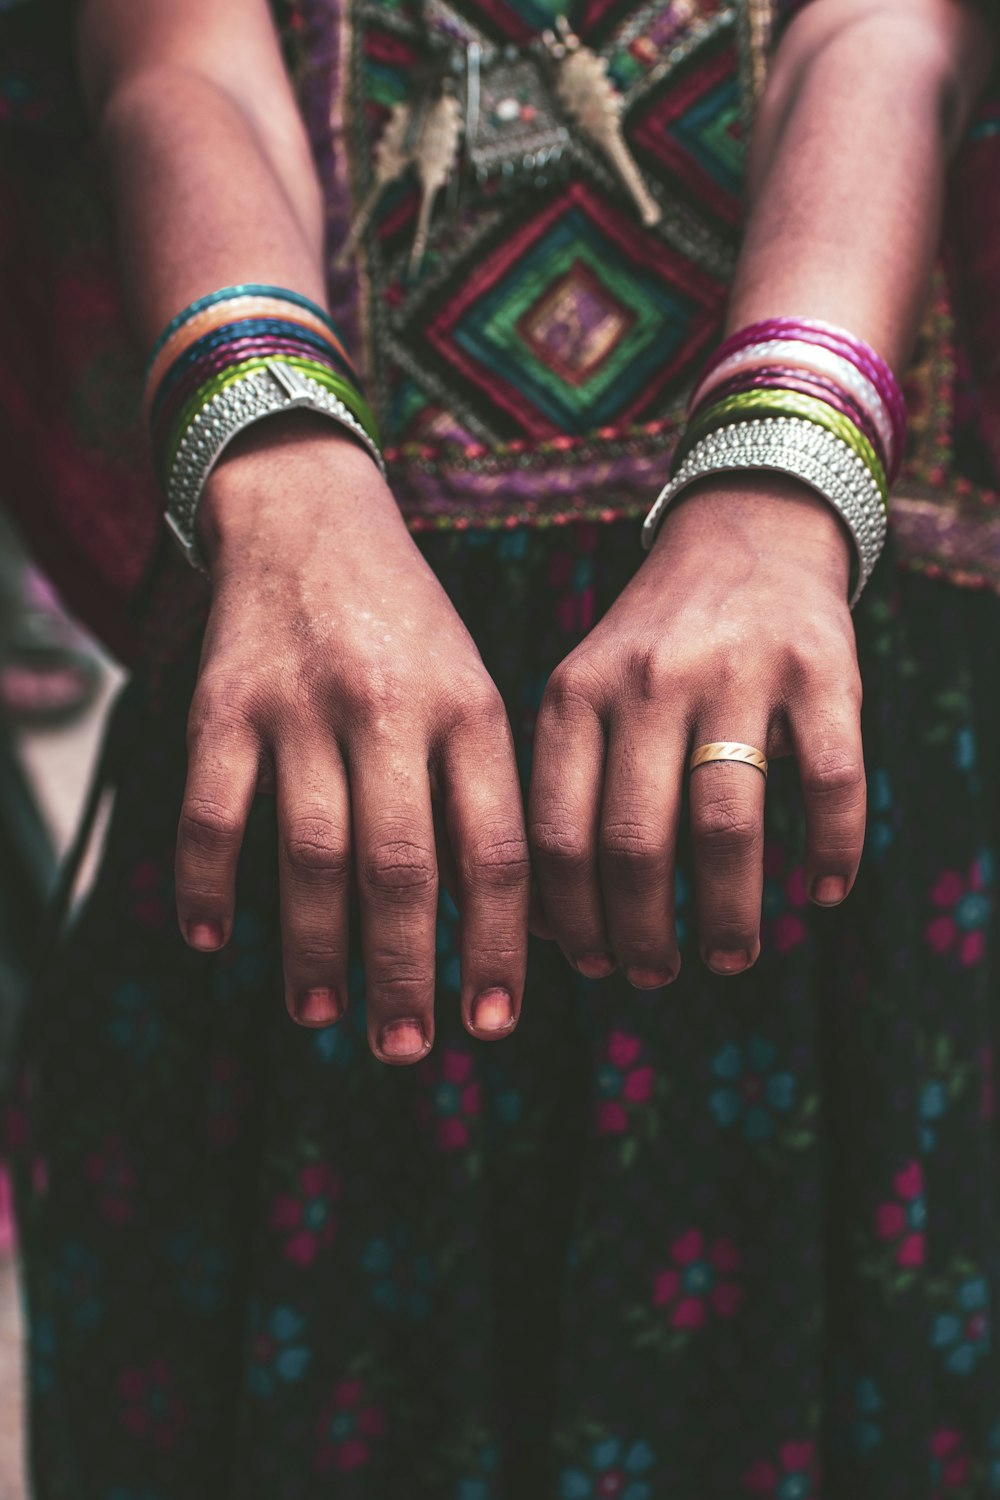 a close up of a person's hands wearing bracelets